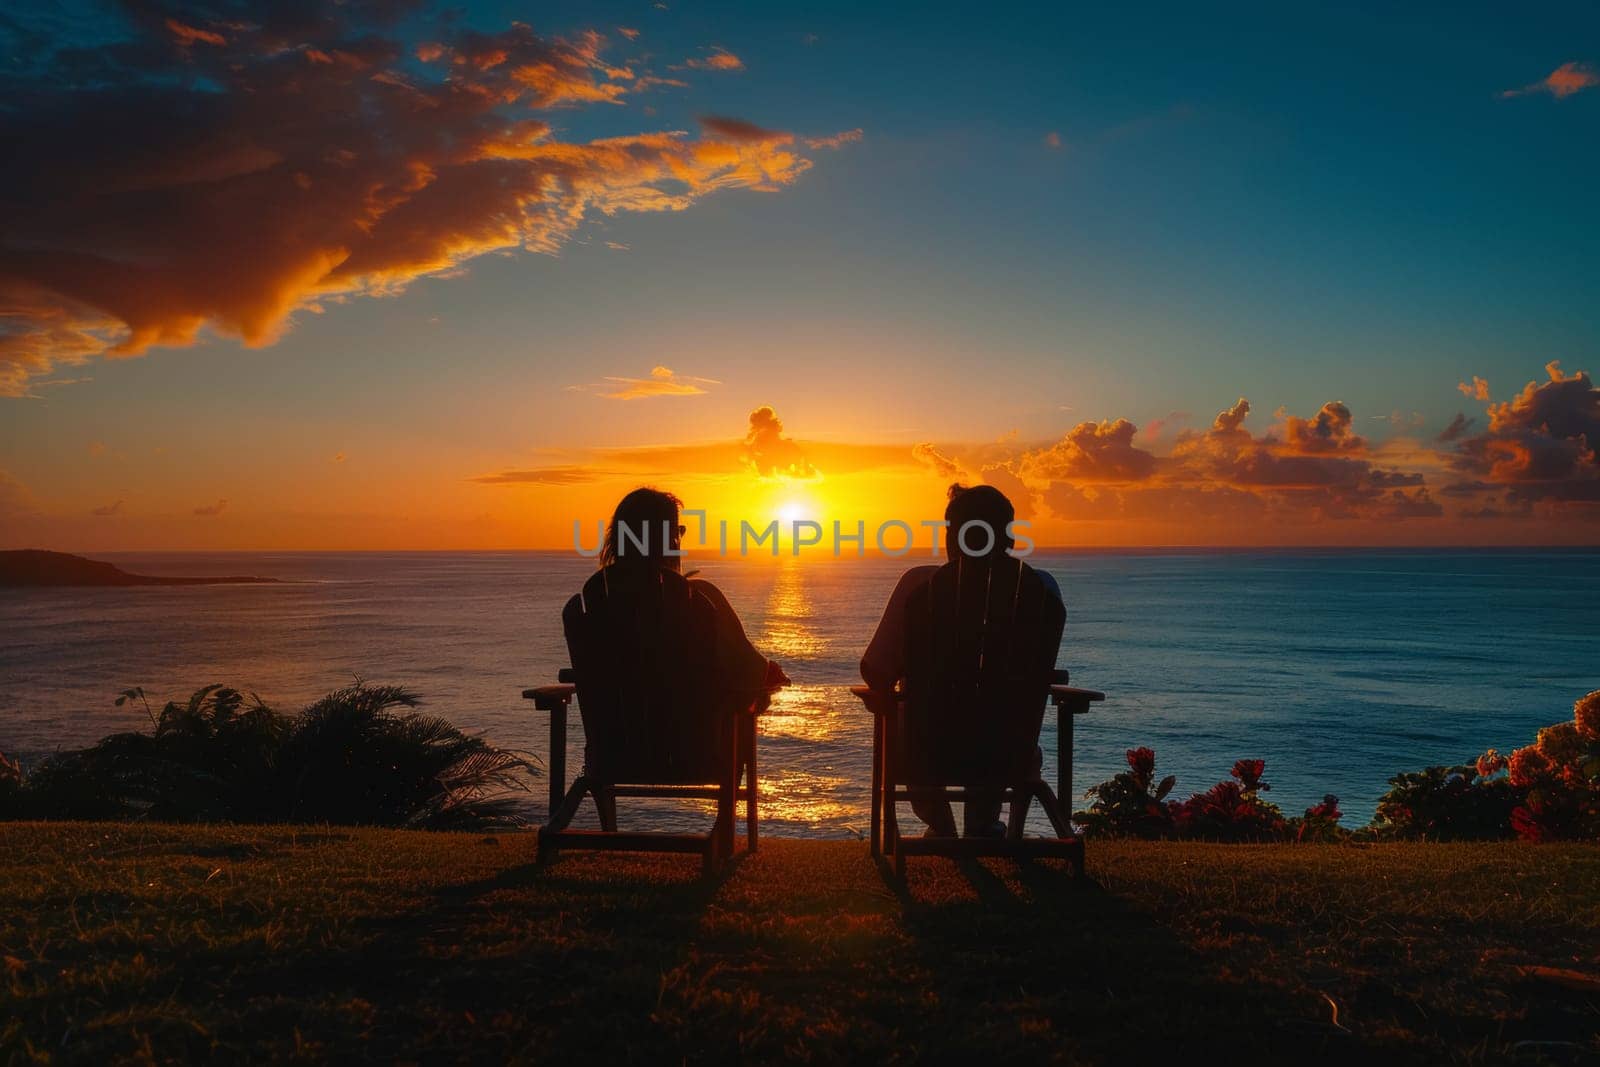 A retired couple enjoys a serene sunset from their comfortable chairs overlooking the ocean, capturing a moment of peaceful reflection and togetherness in a picturesque setting.